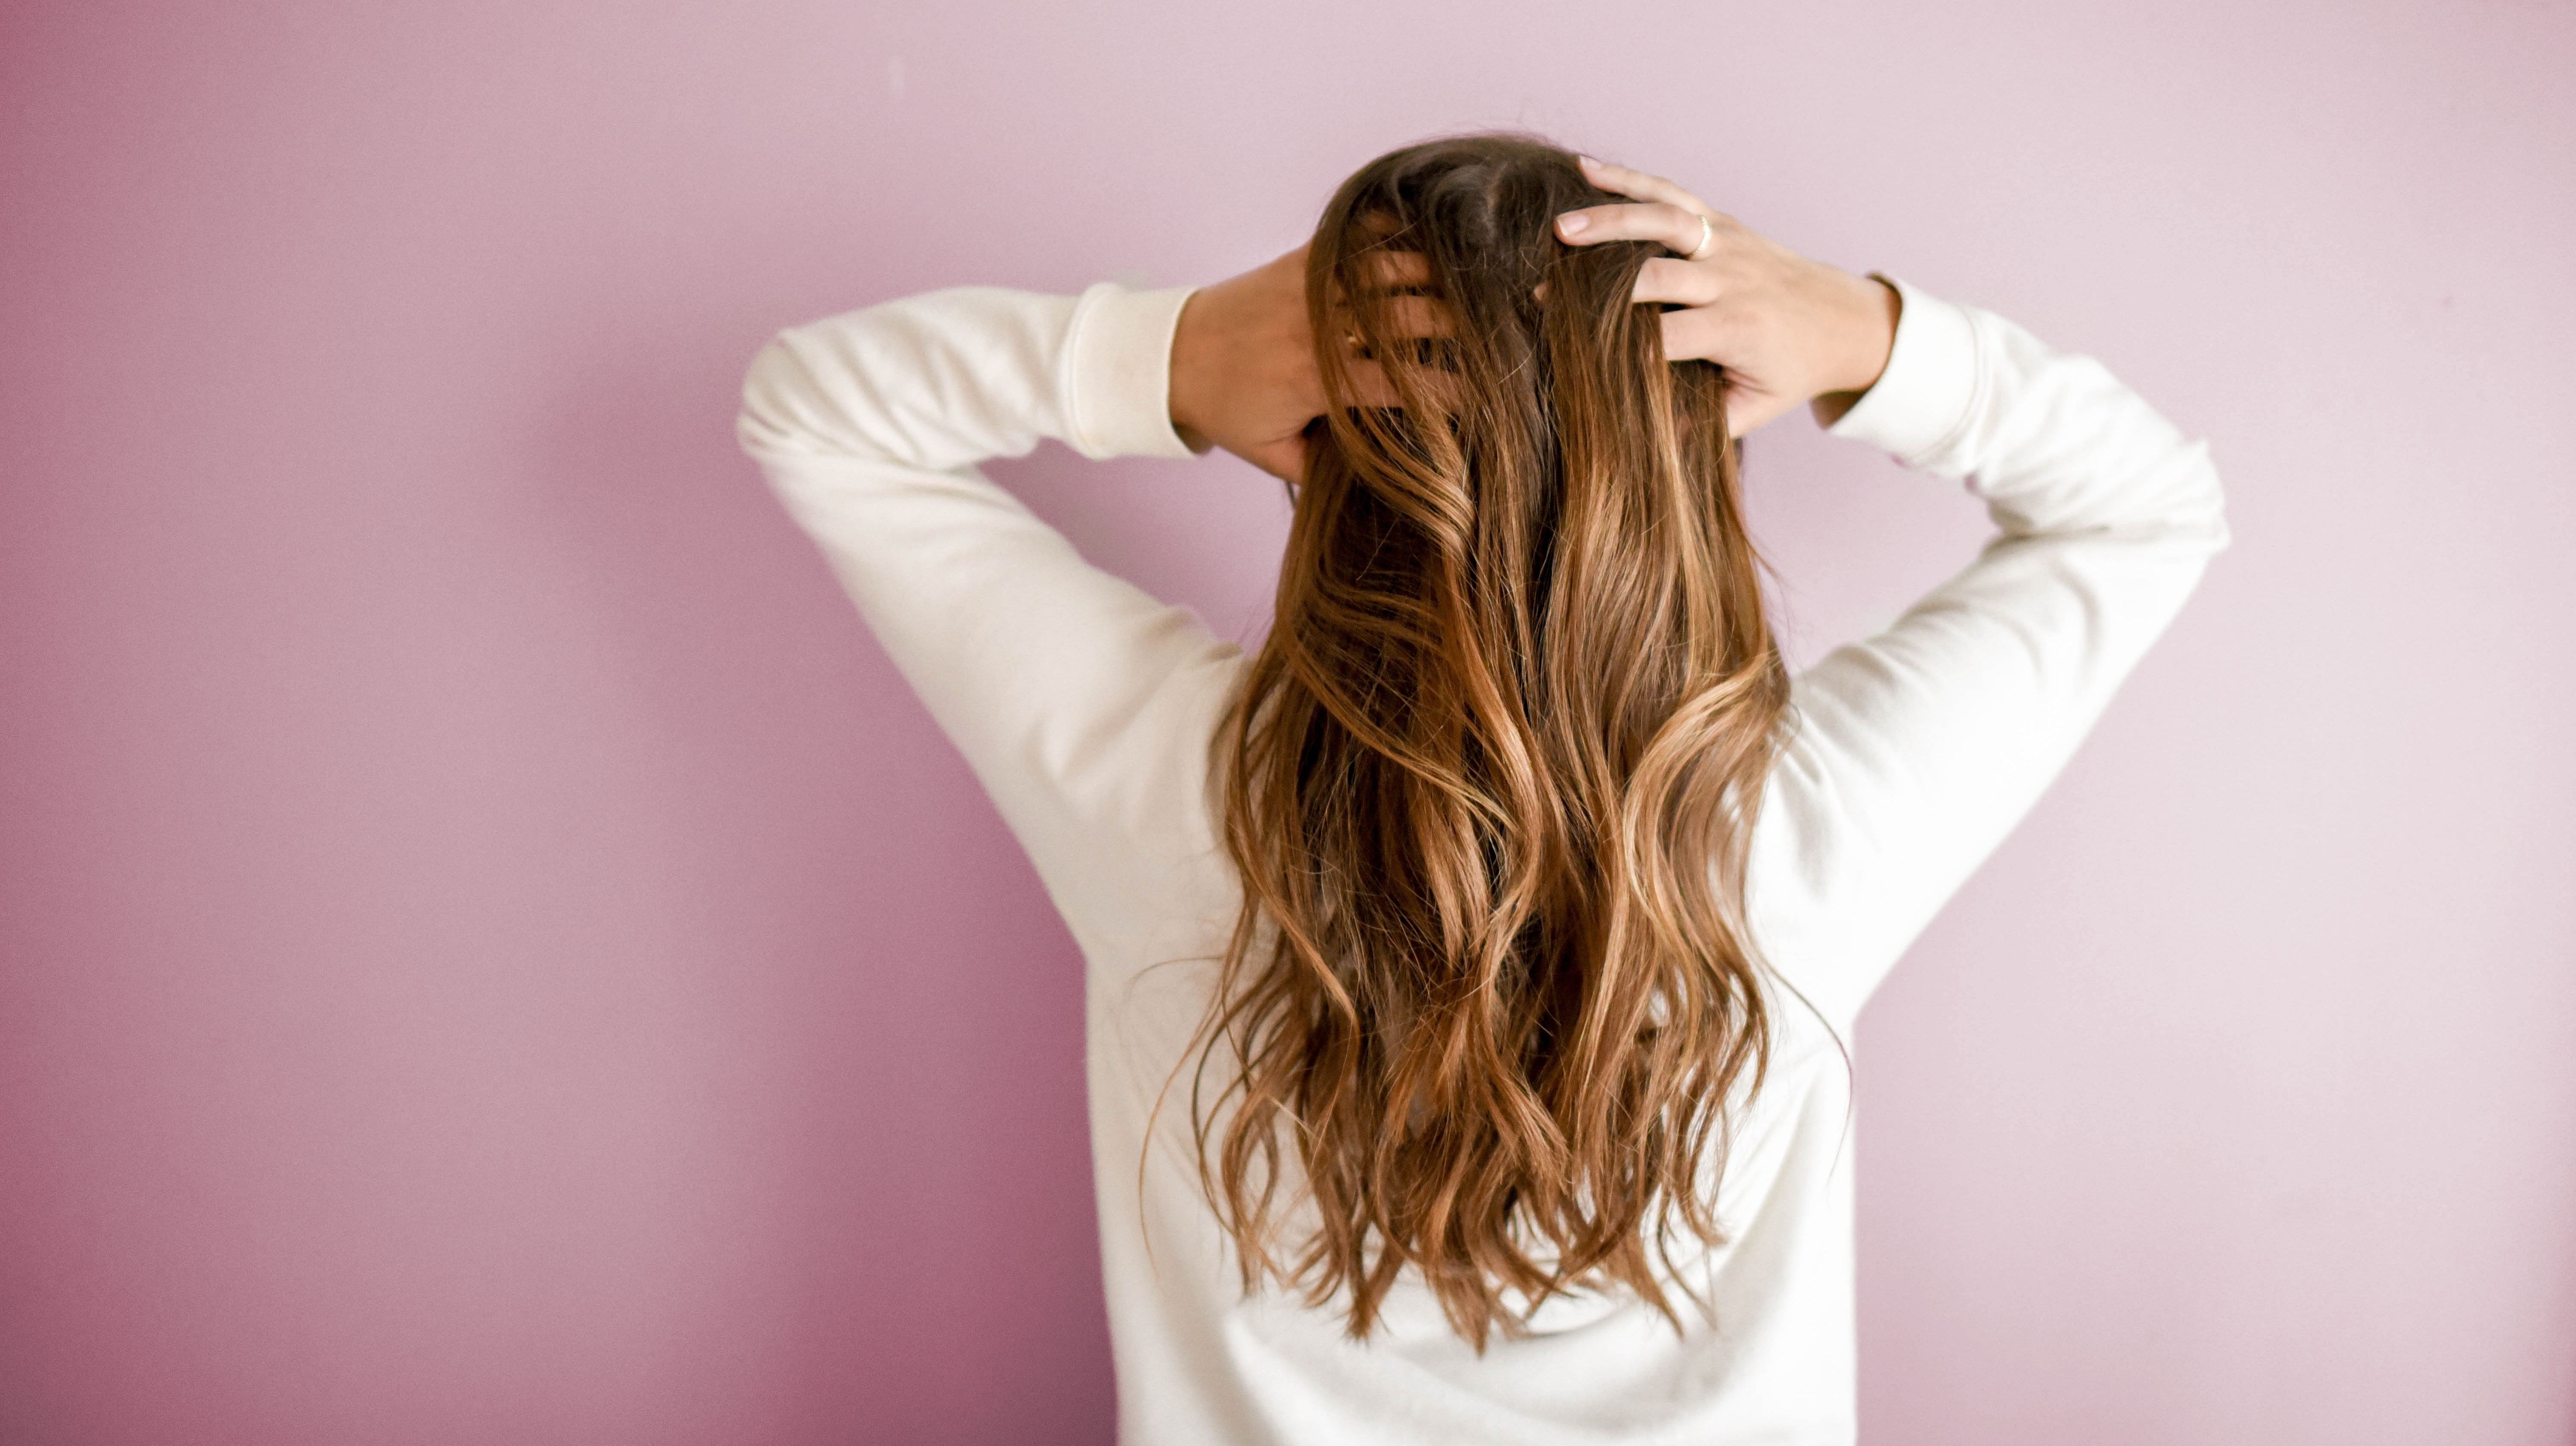 How Much Money Can You Save By Cutting Your Own Hair?